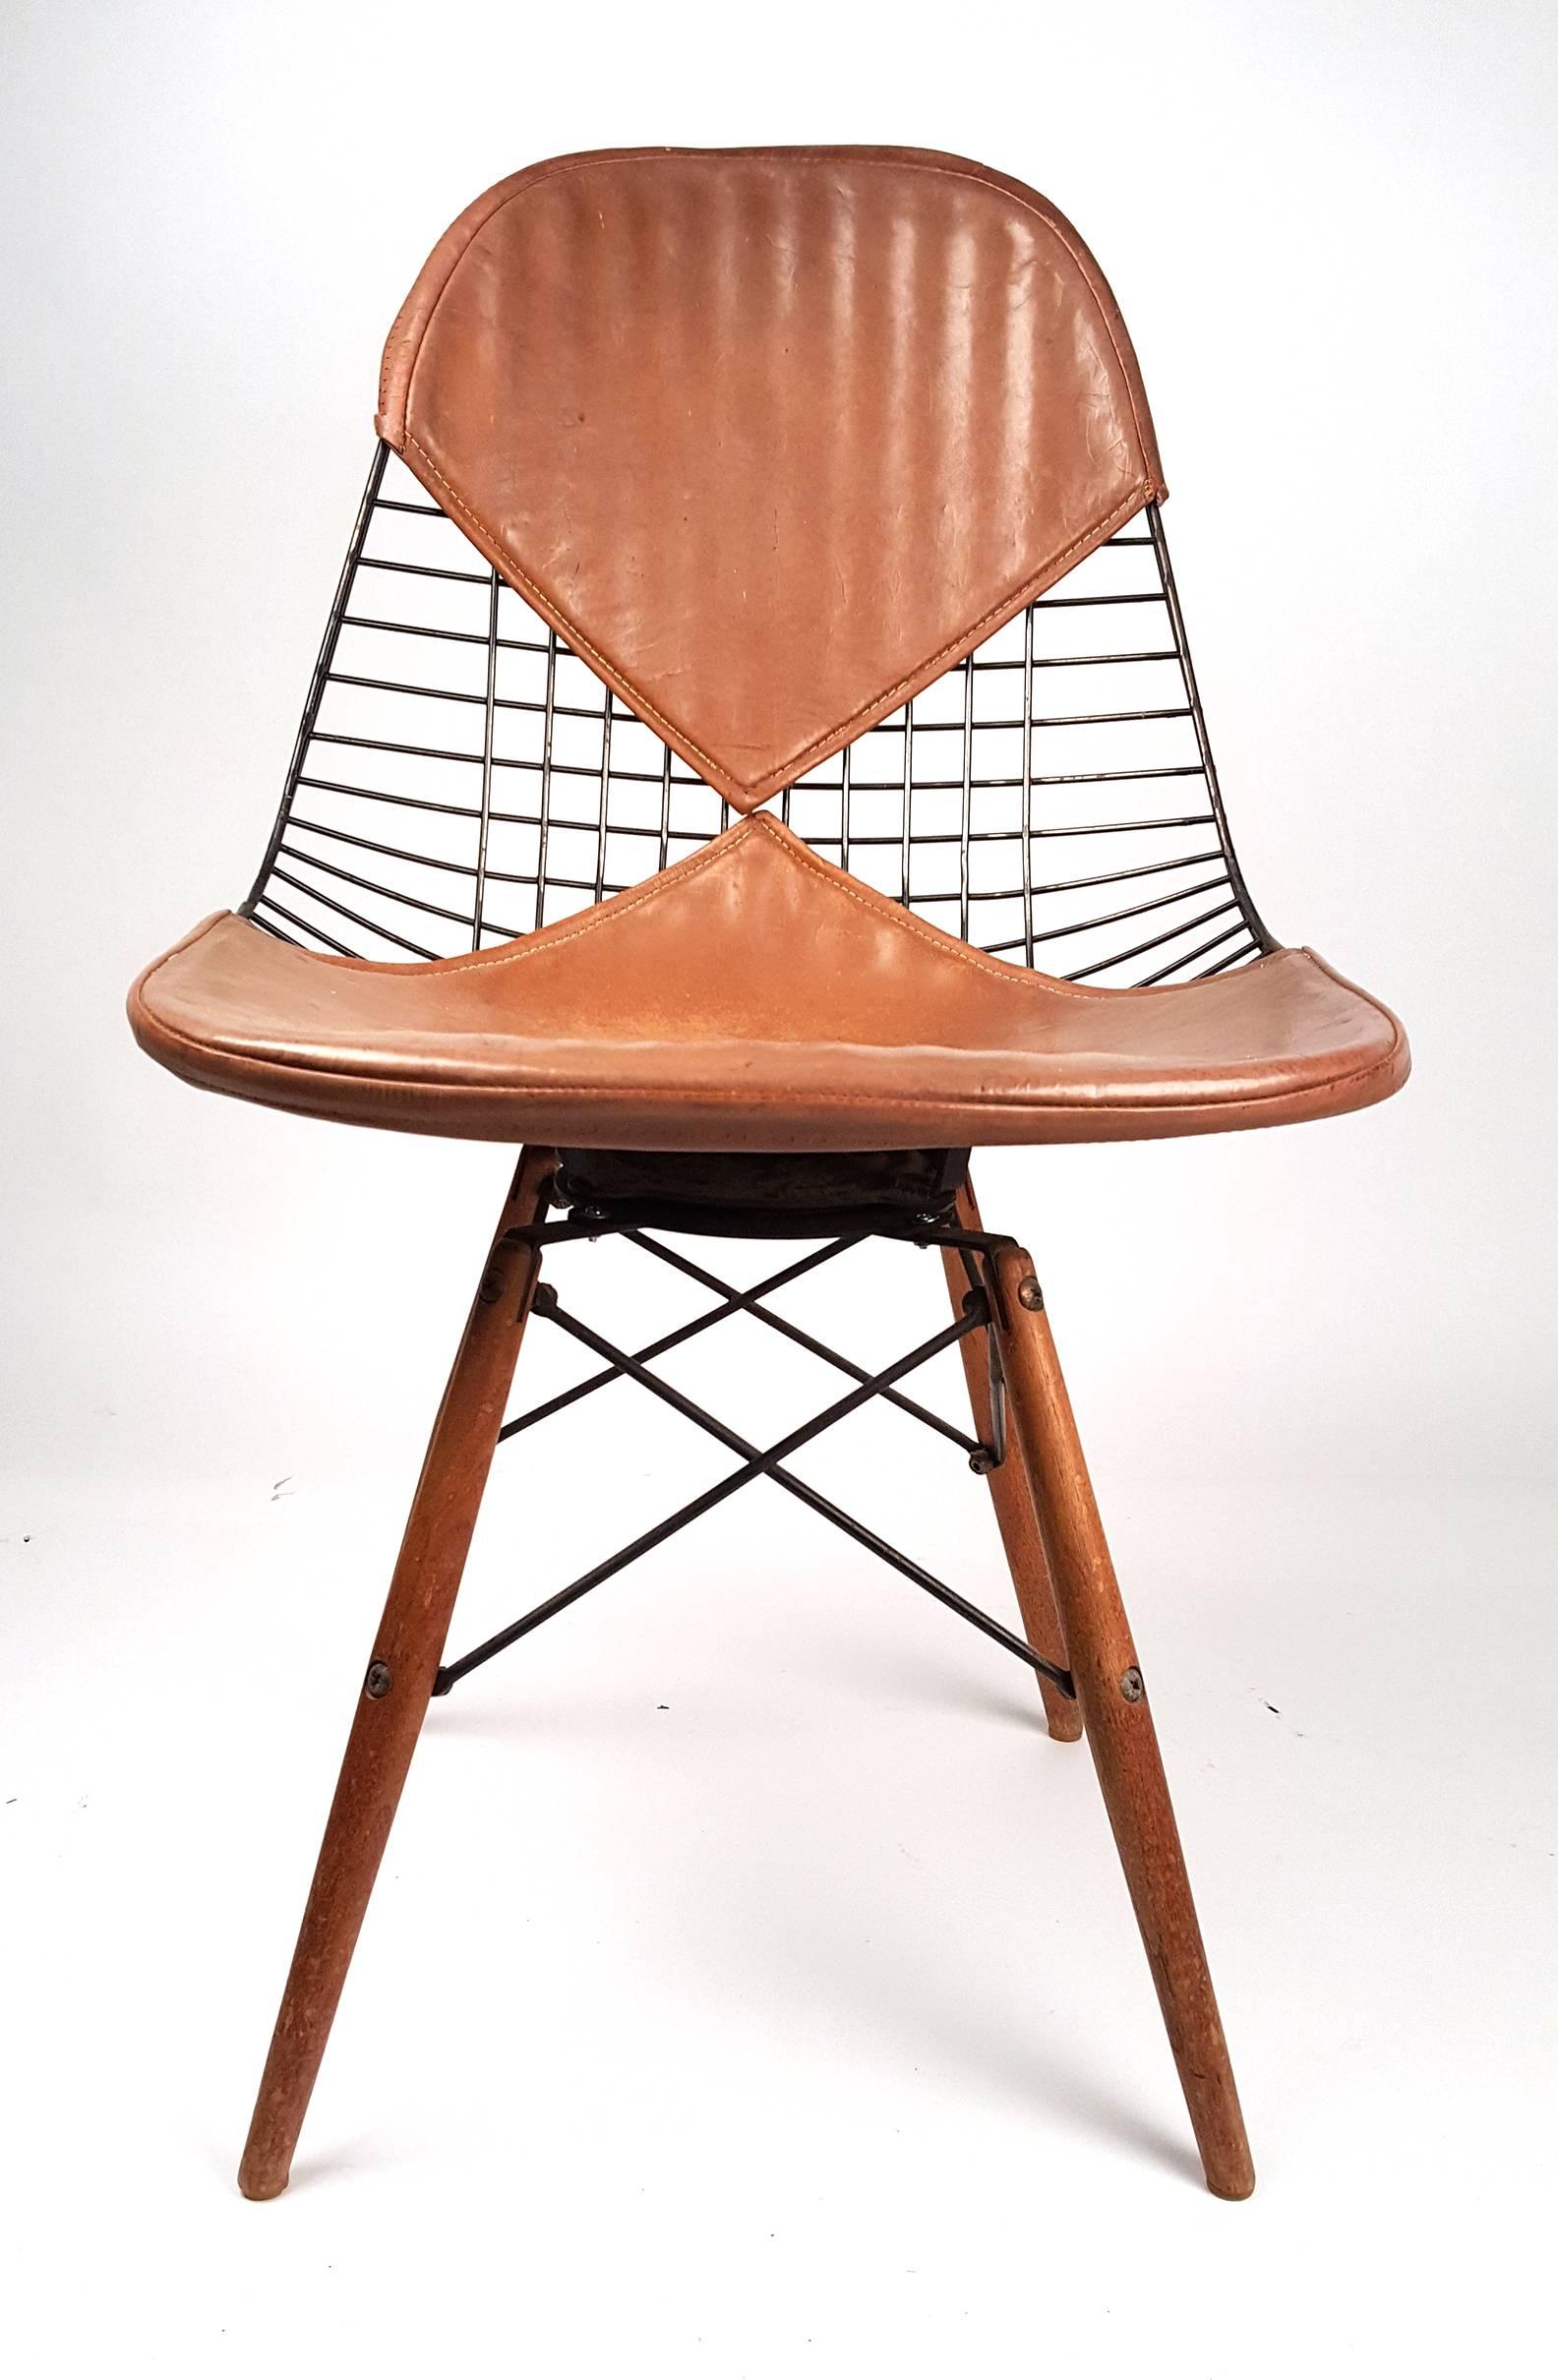 Early and rare Eames for Herman Miller PKW-2 dowel leg swivel chair with leather bikini cover. (Gorgeous patina!) No breaks or rewelds. The base is original to the seat. The original screws attaching the seat to the base are present. The paper label